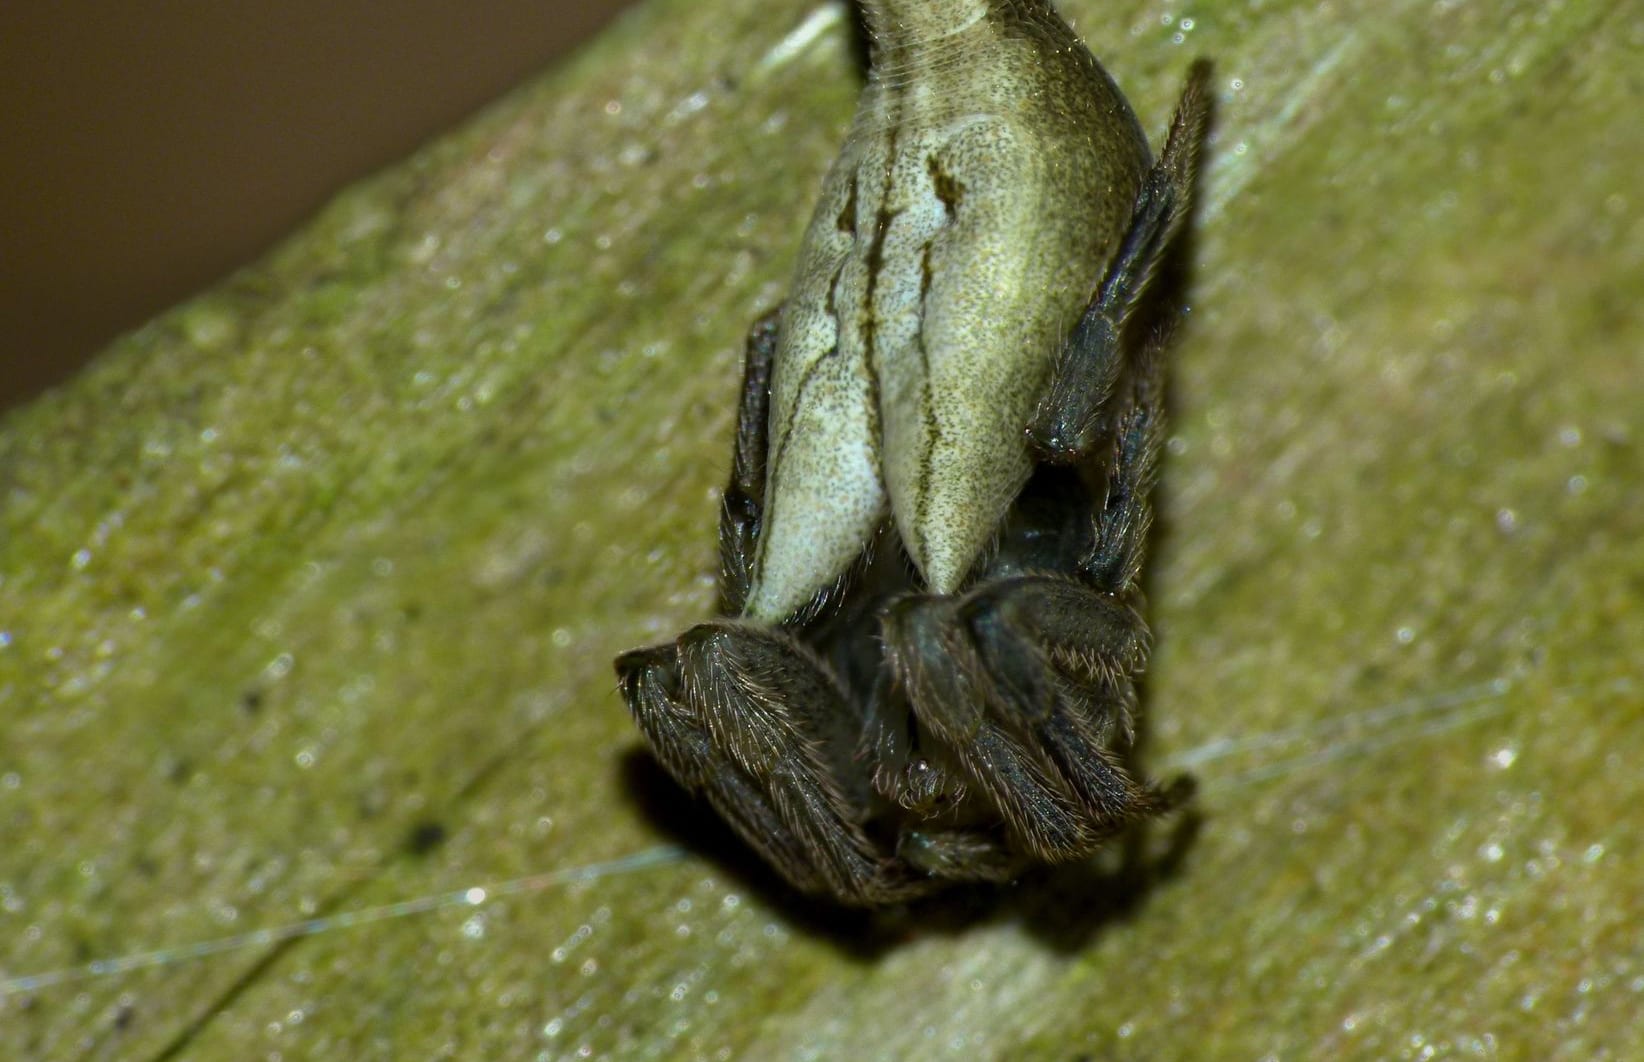 Female Tailed Forest Spider